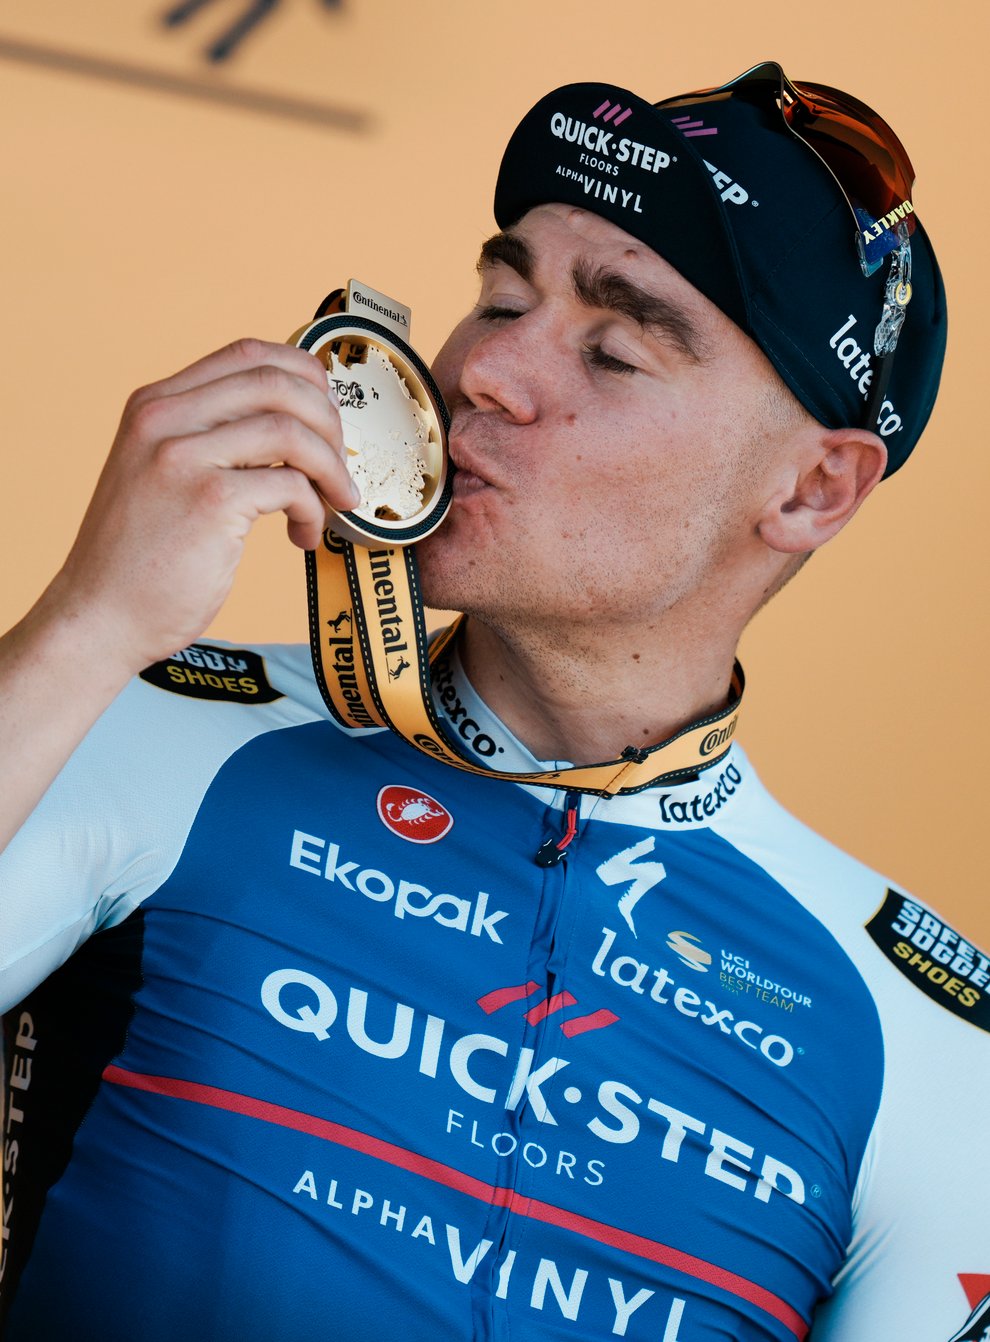 Fabio Jakobsen celebrated his first career Tour de France stage win on Saturday (Thibault Camus/AP)